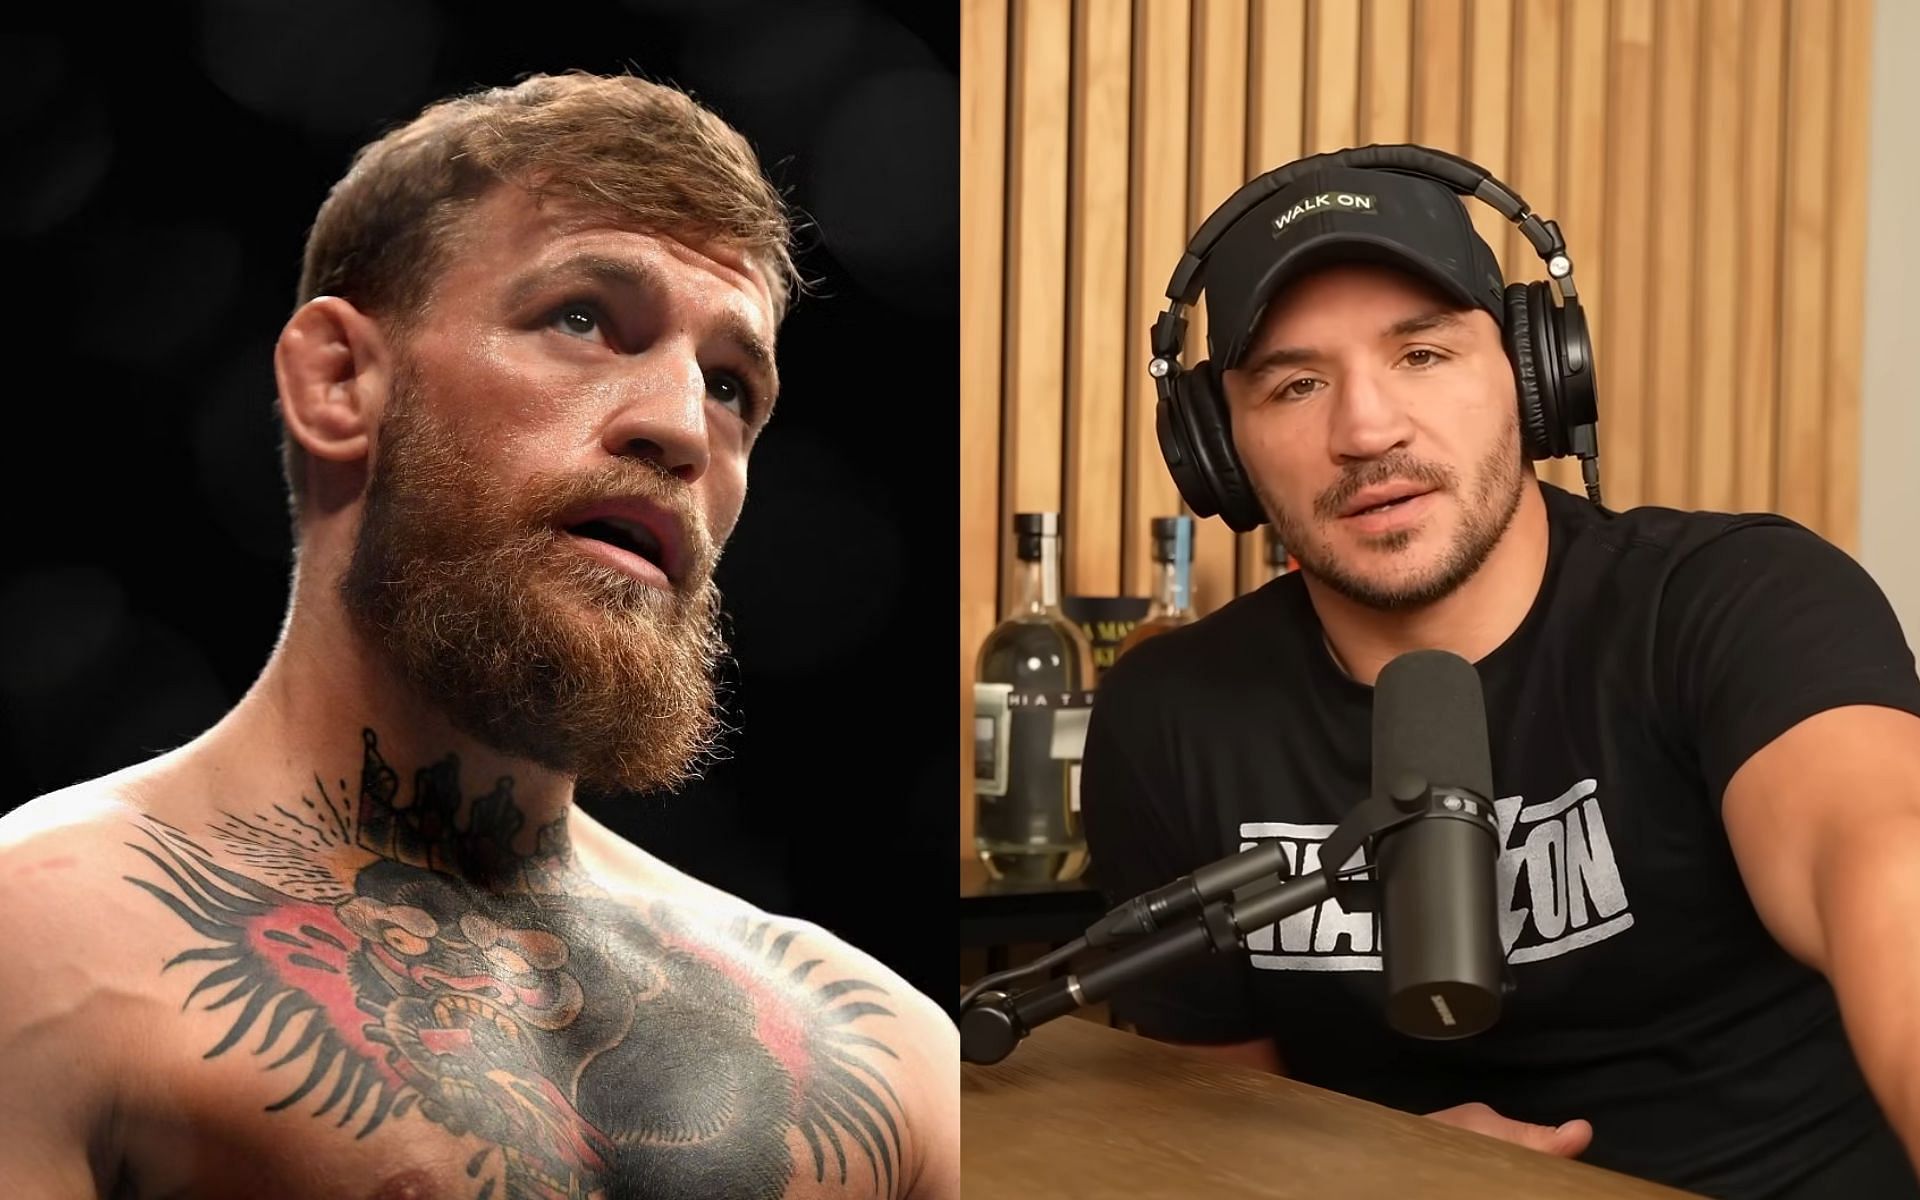 Michael Chandler (right) sheds light on his doubts about fighting Conor McGregor (left) [Images Courtesy: @GettyImages, @michaelchandler on YouTube]